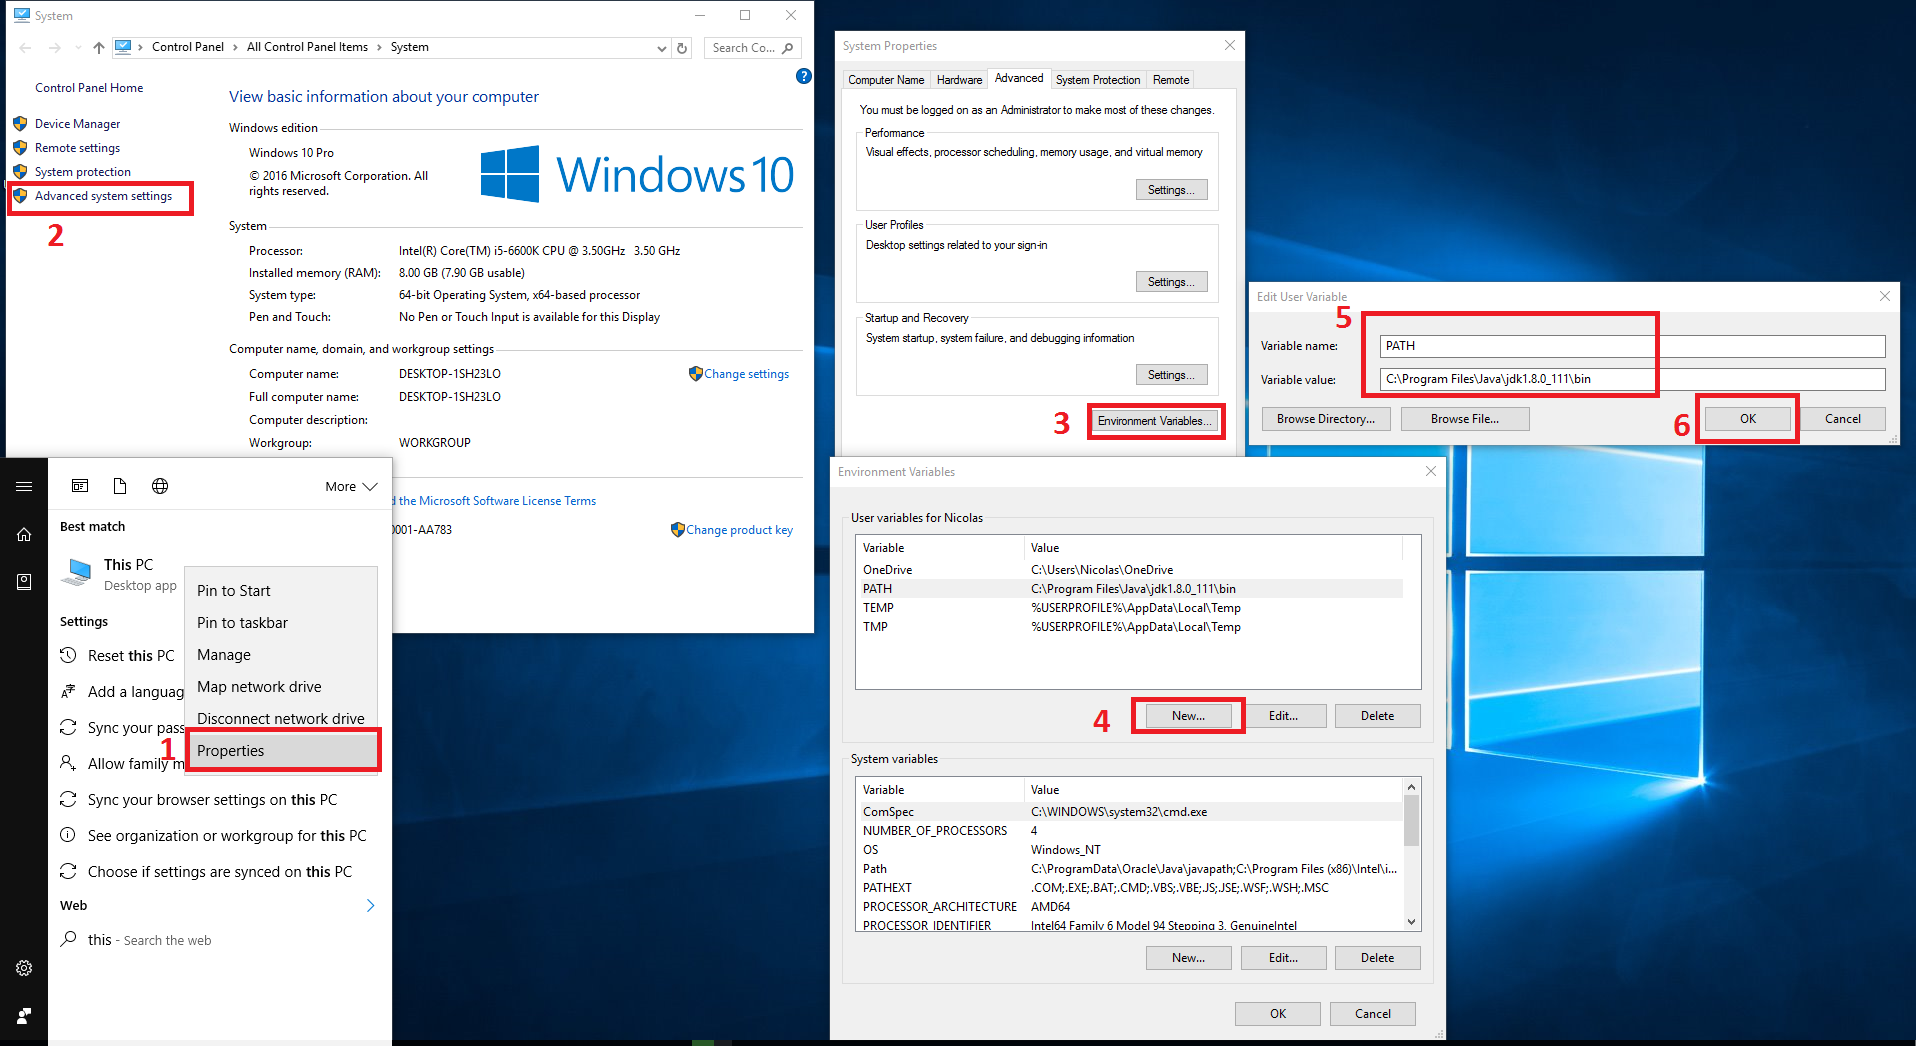 Steps to add Environment variables in Windows 10